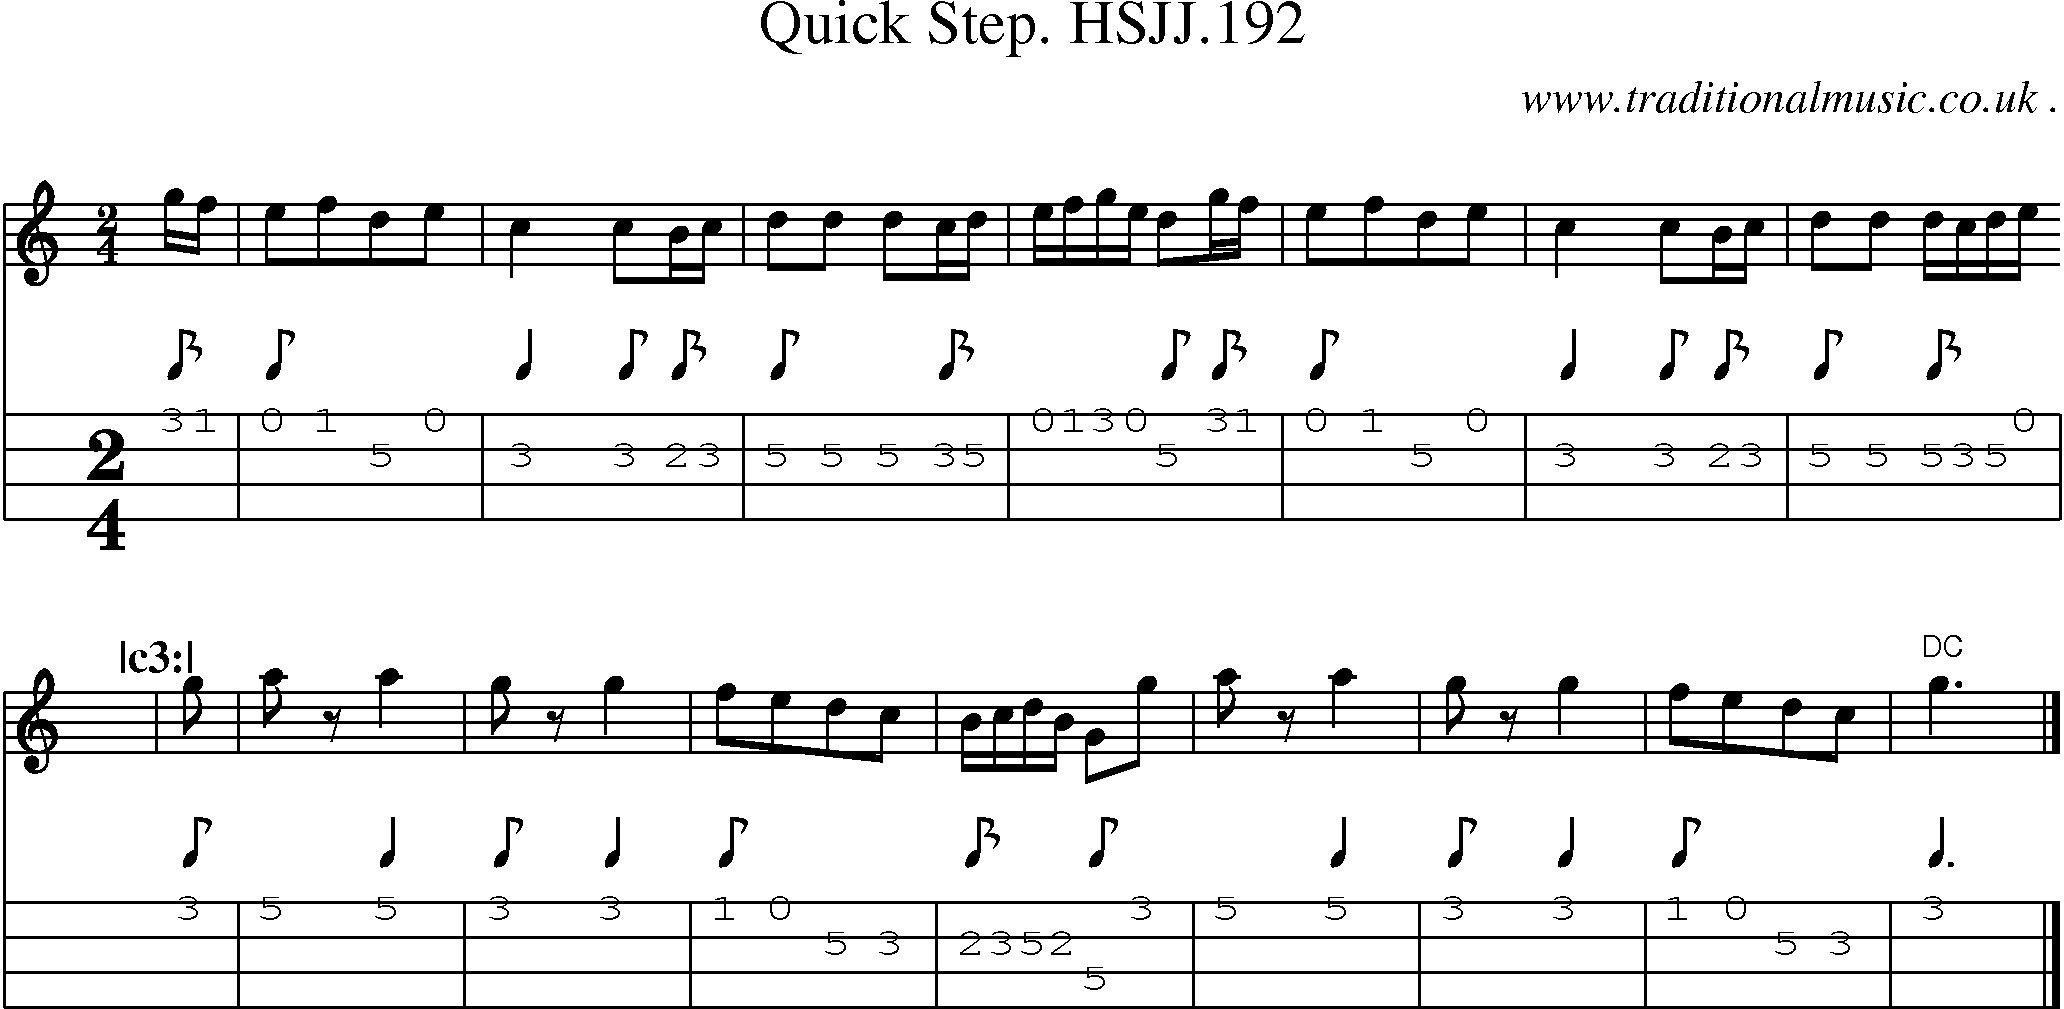 Sheet-music  score, Chords and Mandolin Tabs for Quick Step Hsjj192